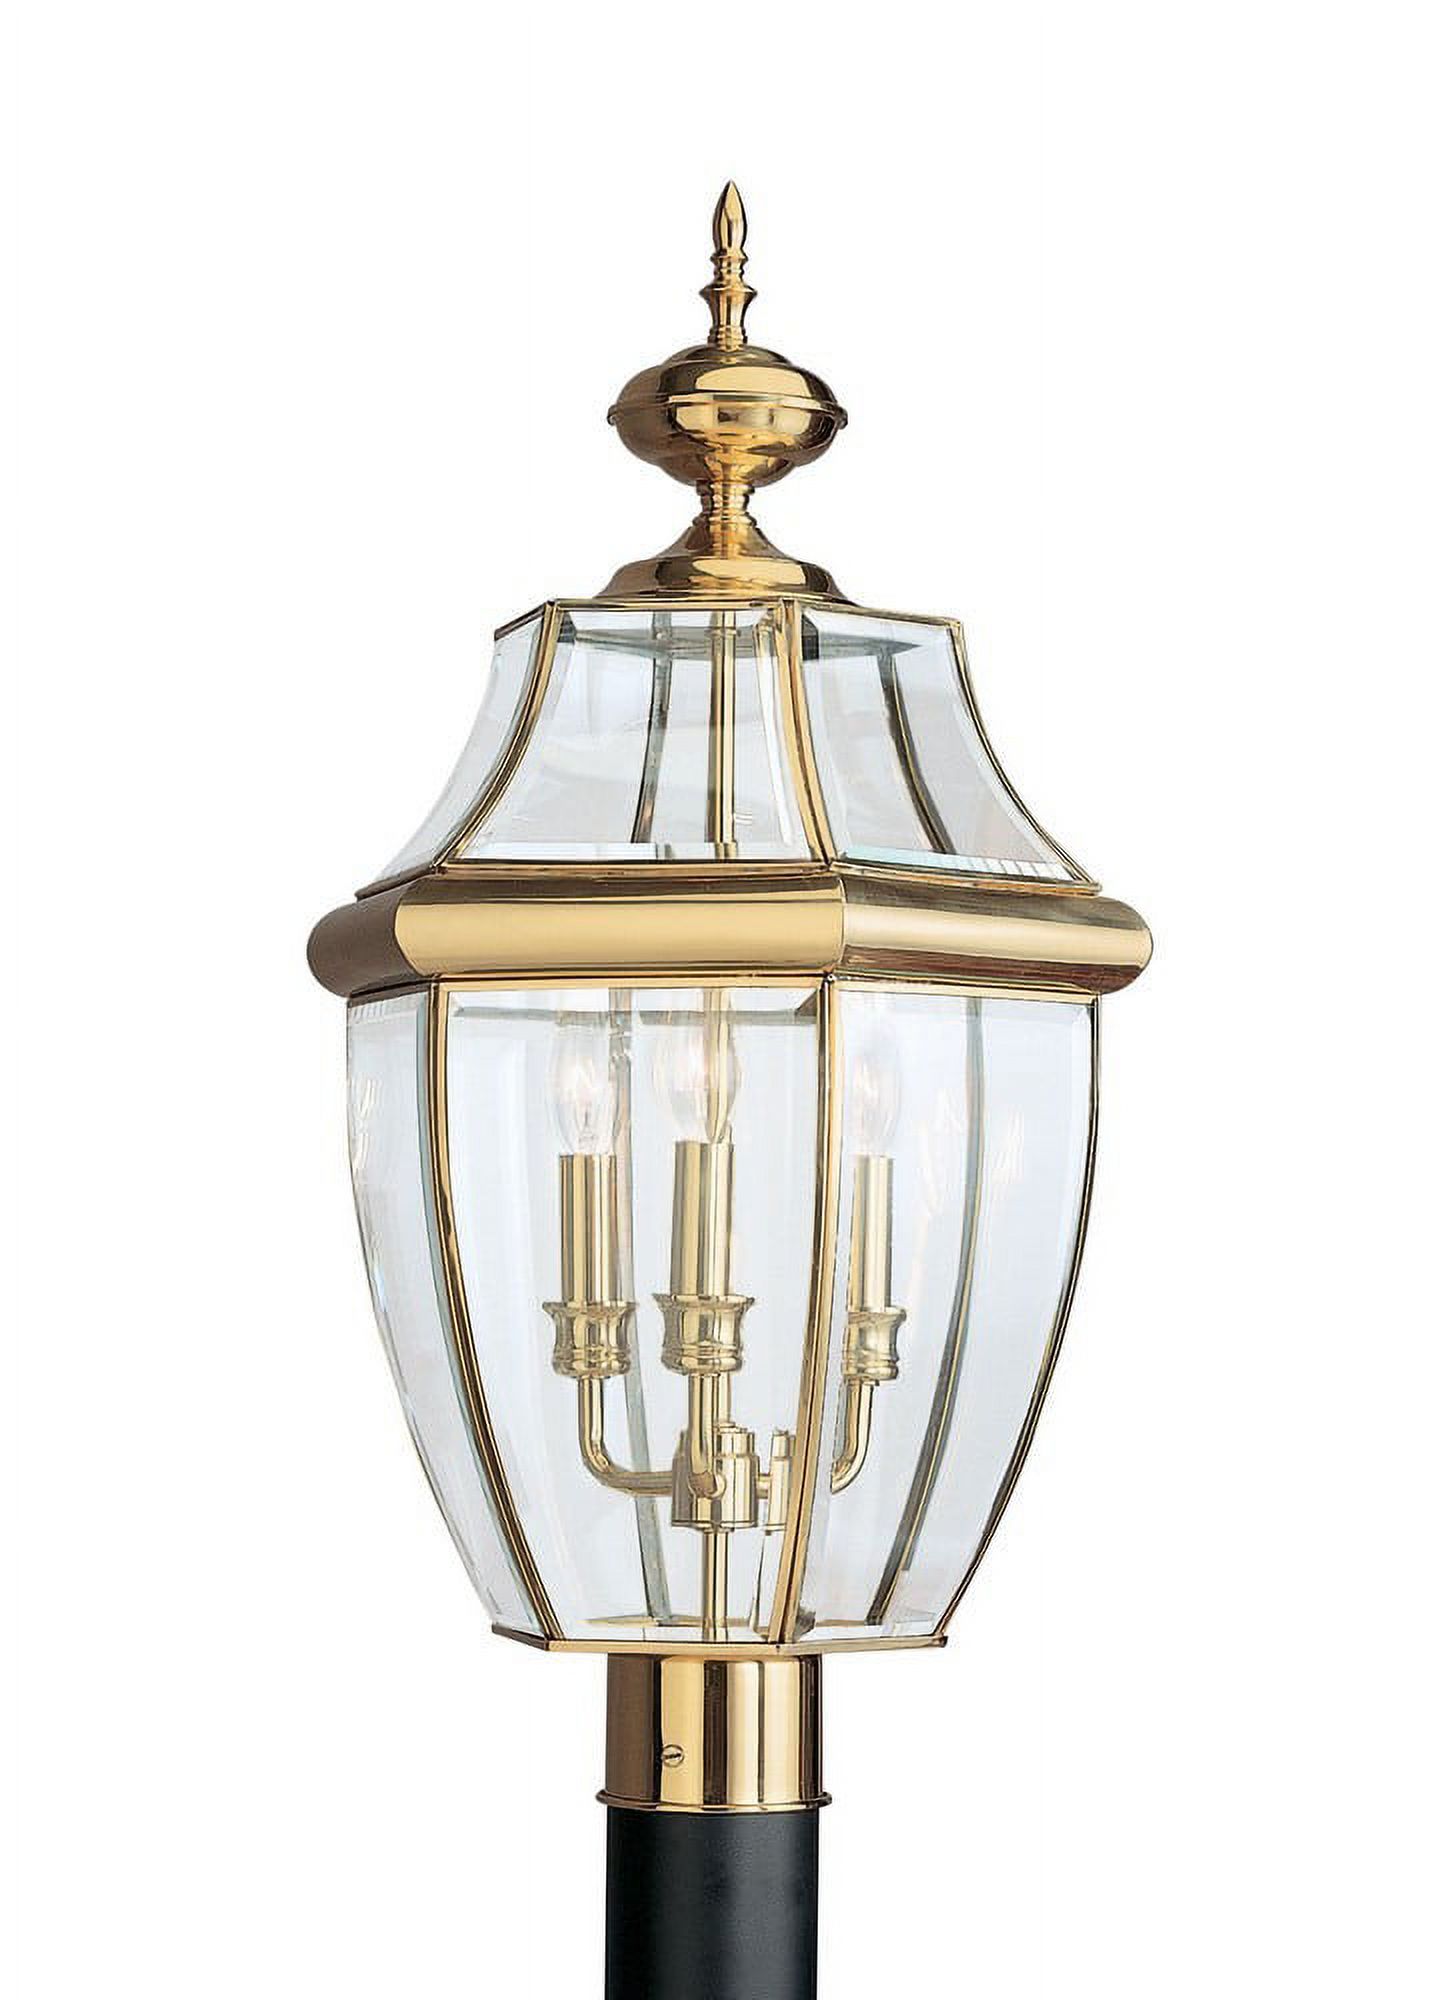 8239-02-Generation Lighting-Sea Gull Lighting-Three Light Outdoor Post Fixture in Traditional Style-13 Inch wide by 24 Inch high-Polished Brass - image 1 of 5